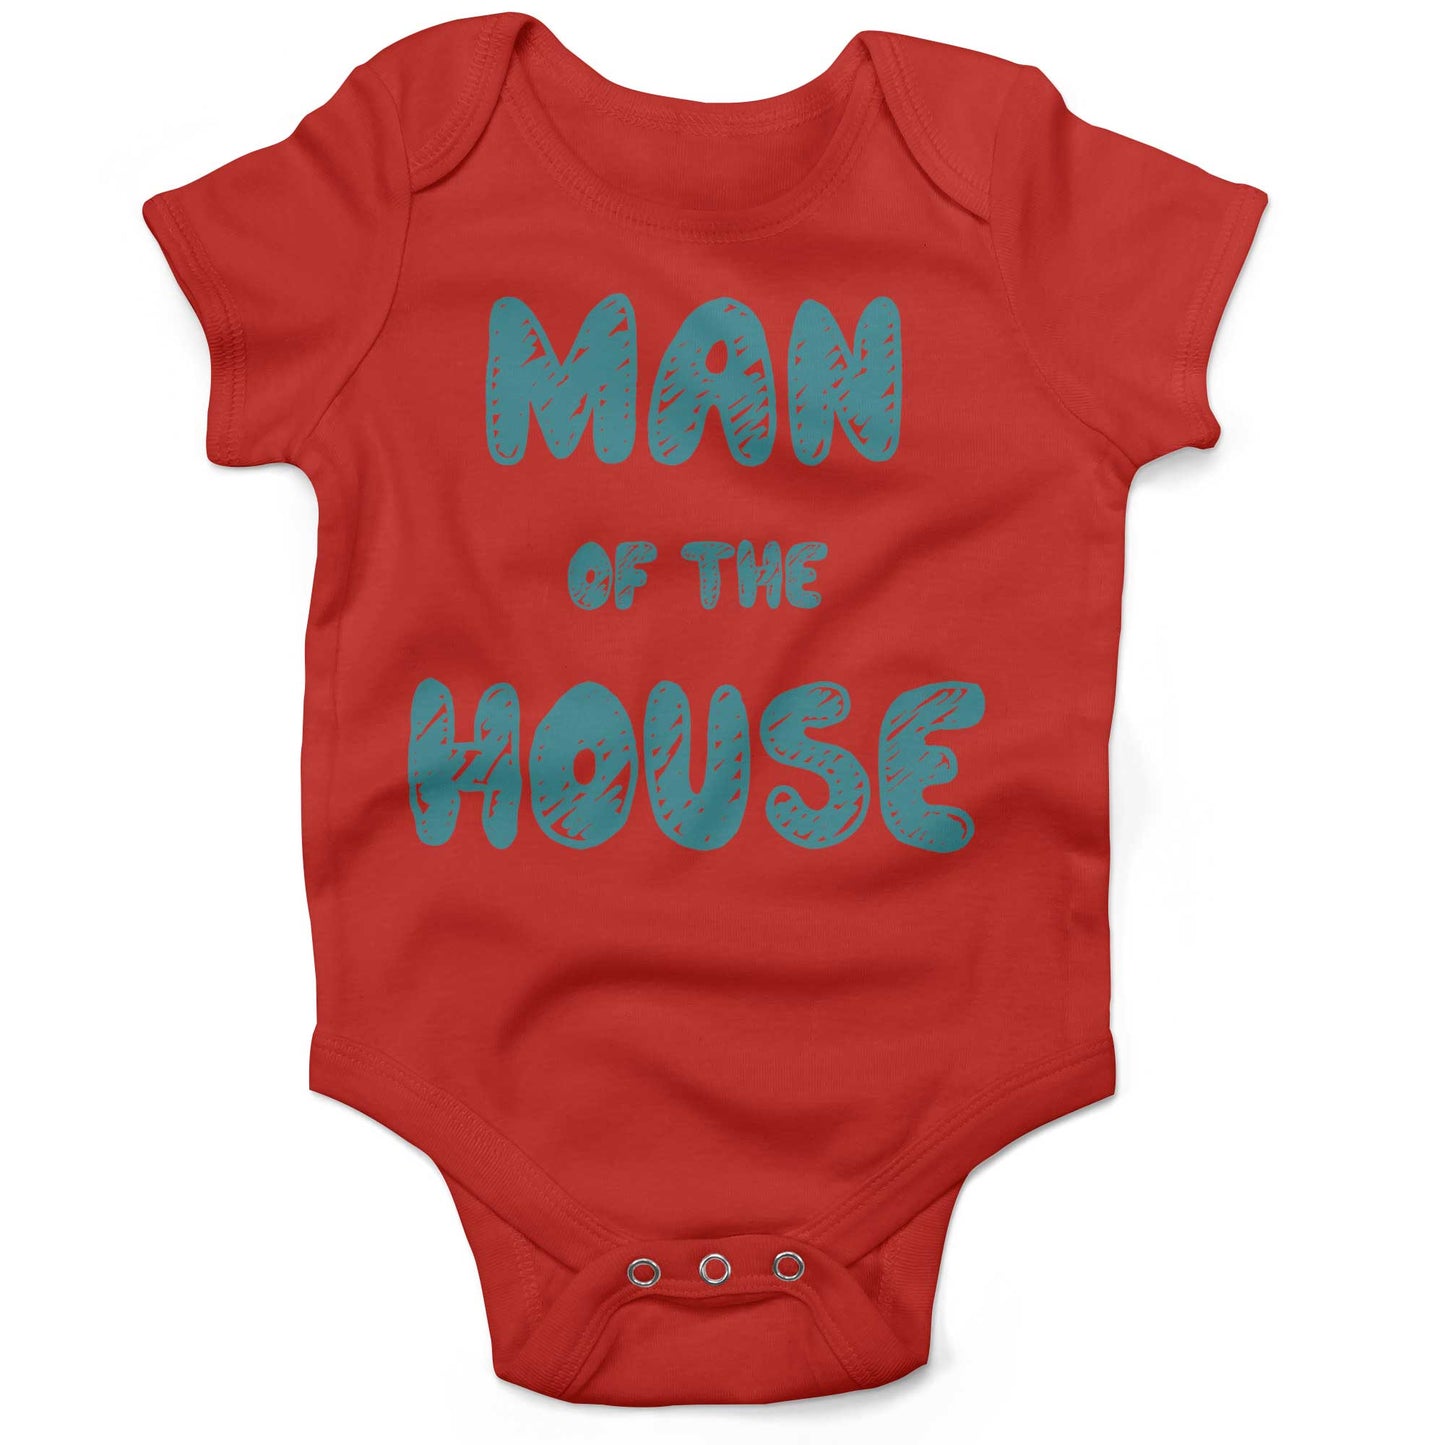 Man Of The House Infant Bodysuit or Raglan Baby Tee-Organic Red-3-6 months